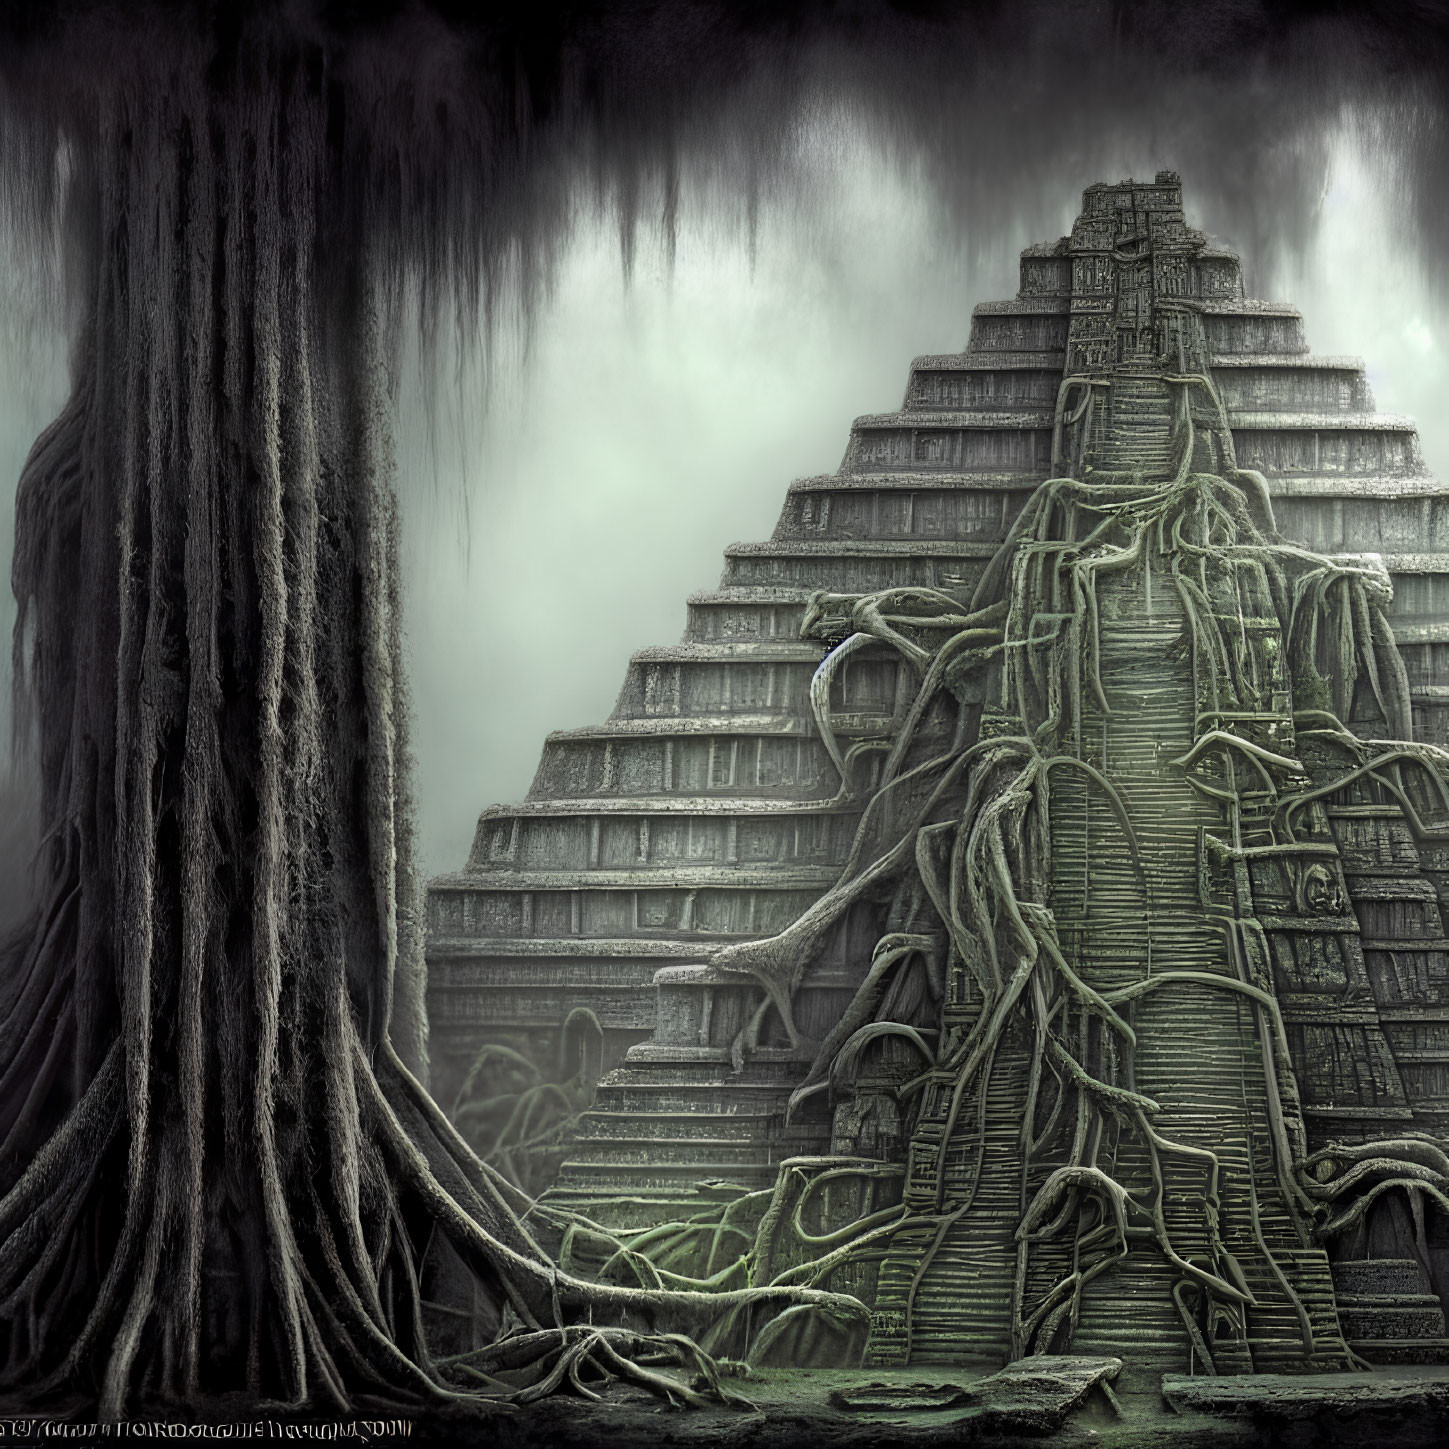 Overgrown pyramid with tree roots in misty setting